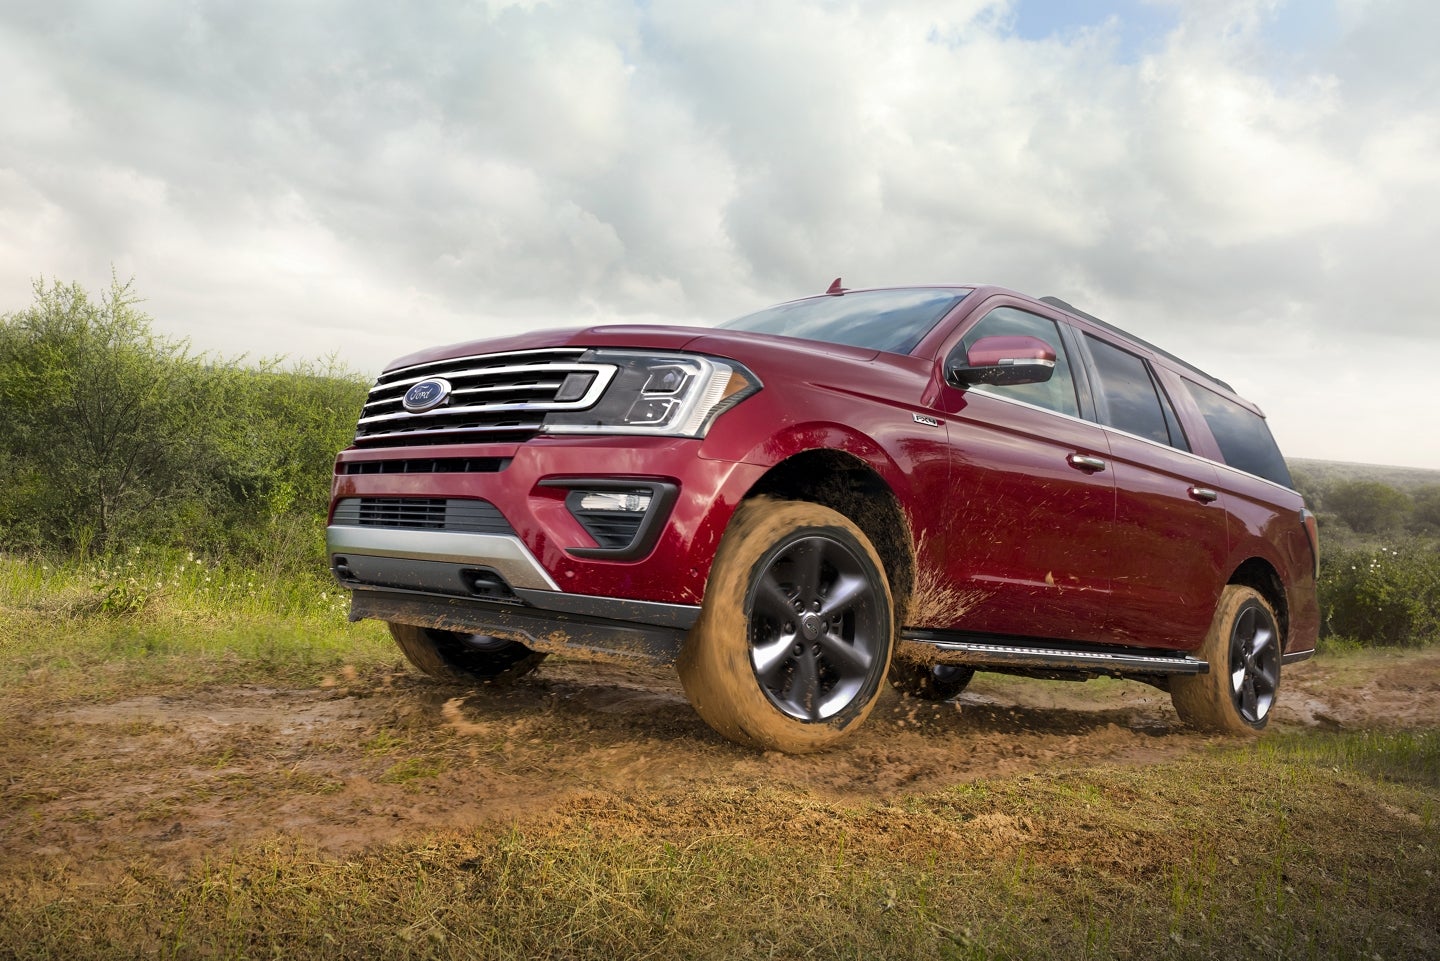 2020 Ford Expedition Key Features near Fort Rucker, AL